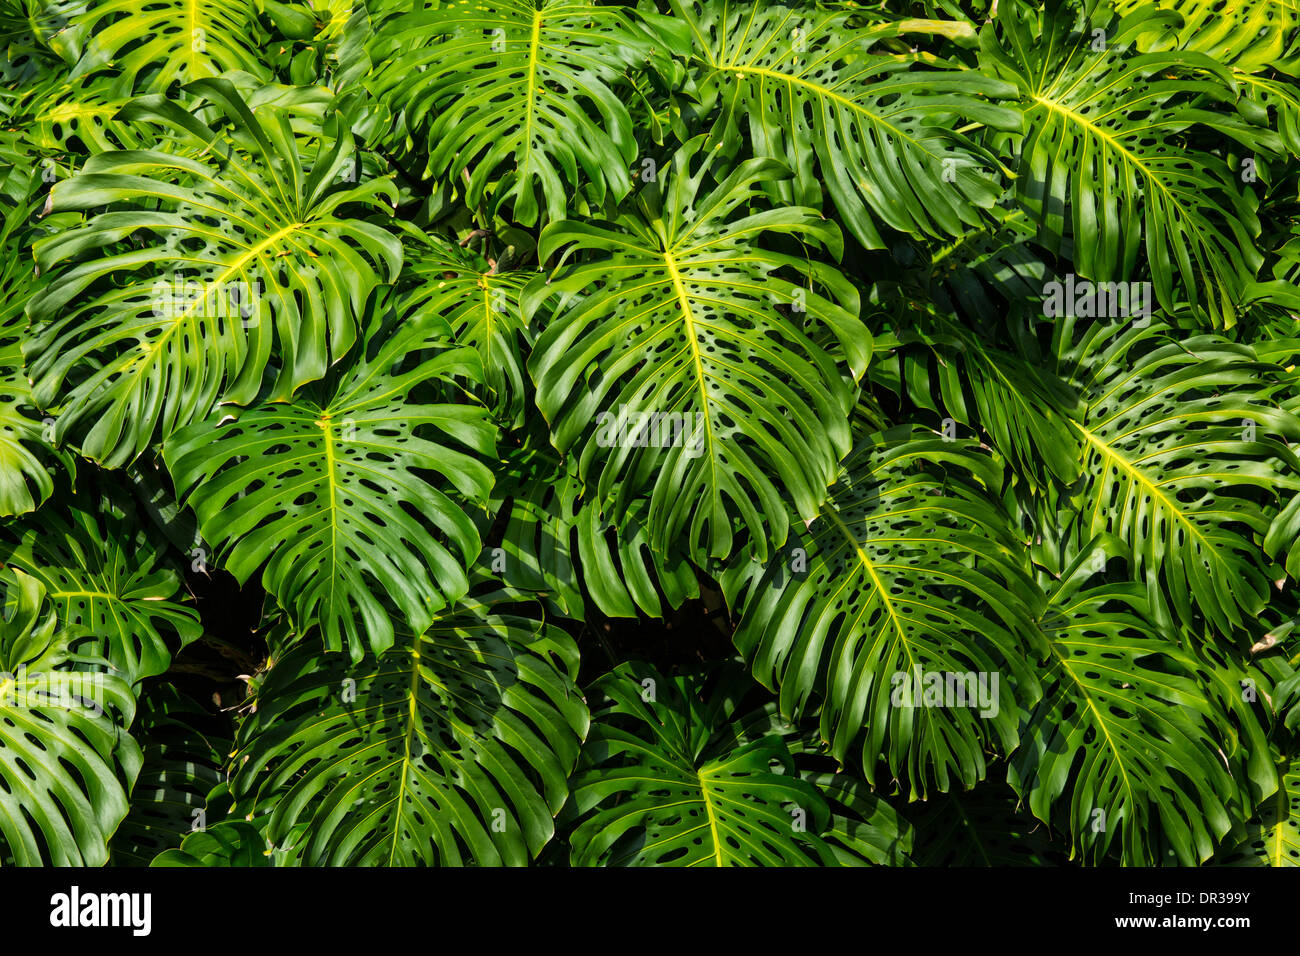 Leaves of large Philodendron plant grown outdoors in Hawaii Stock Photo